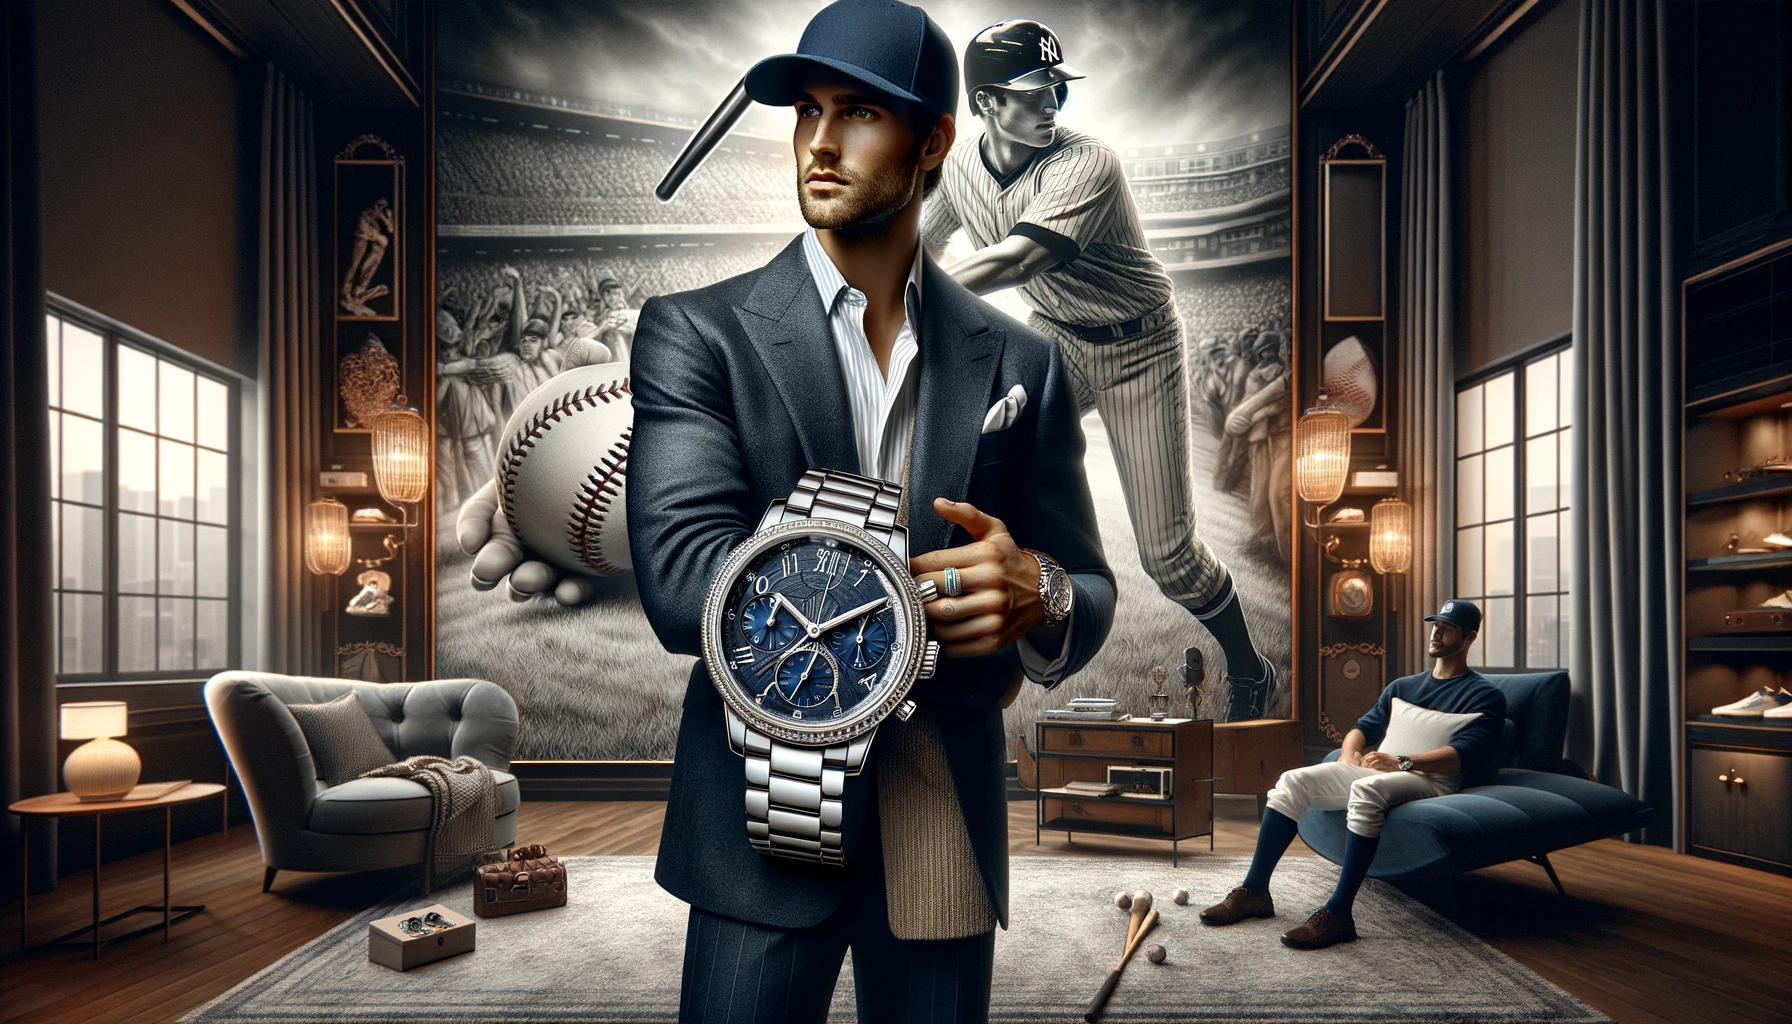 Imagine a scene where a renowned baseball player is elegantly showcasing a luxurious wristwatch, reputed to be his choice of timepiece. The player stands confidently in a well-lit, sophisticated space that hints at both his sports and style icon status. He is dressed in a smart casual outfit, complementing the wristwatch's elegance. In one hand, he holds a baseball, subtly nodding to his profession, while the other hand prominently displays the watch, drawing attention to its design and luxury. The background is tastefully decorated with elements of baseball and high fashion, blending the worlds of sports and luxury watches. This composition not only highlights the watch's sophistication but also the player's stature as a fashion-forward athlete, admired on and off the field.